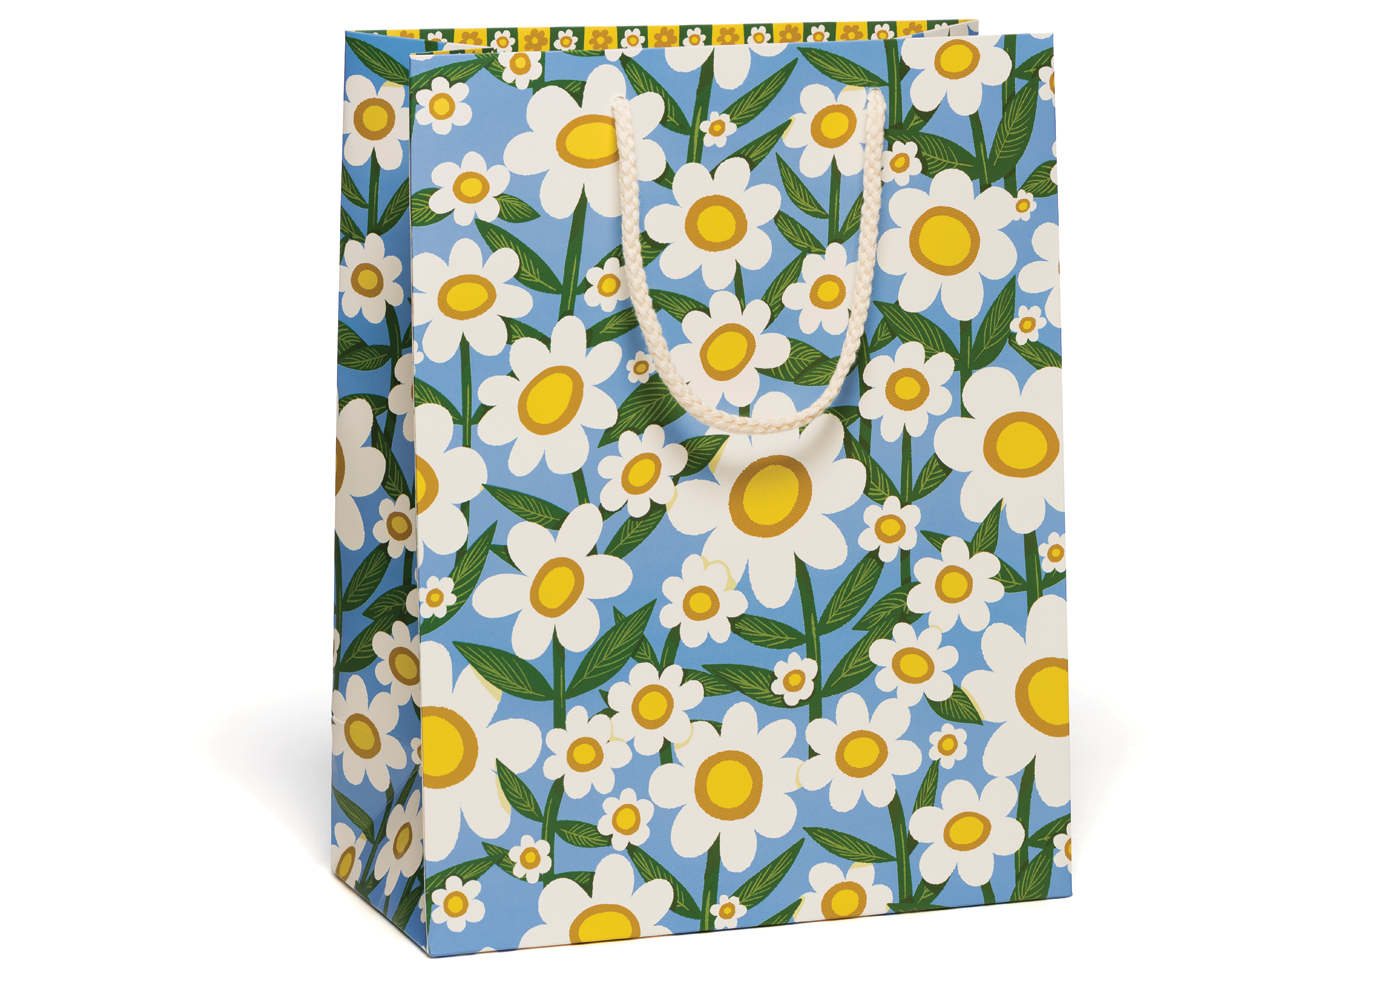 Seventies Daisy gift bag - The Crowd Went Wild